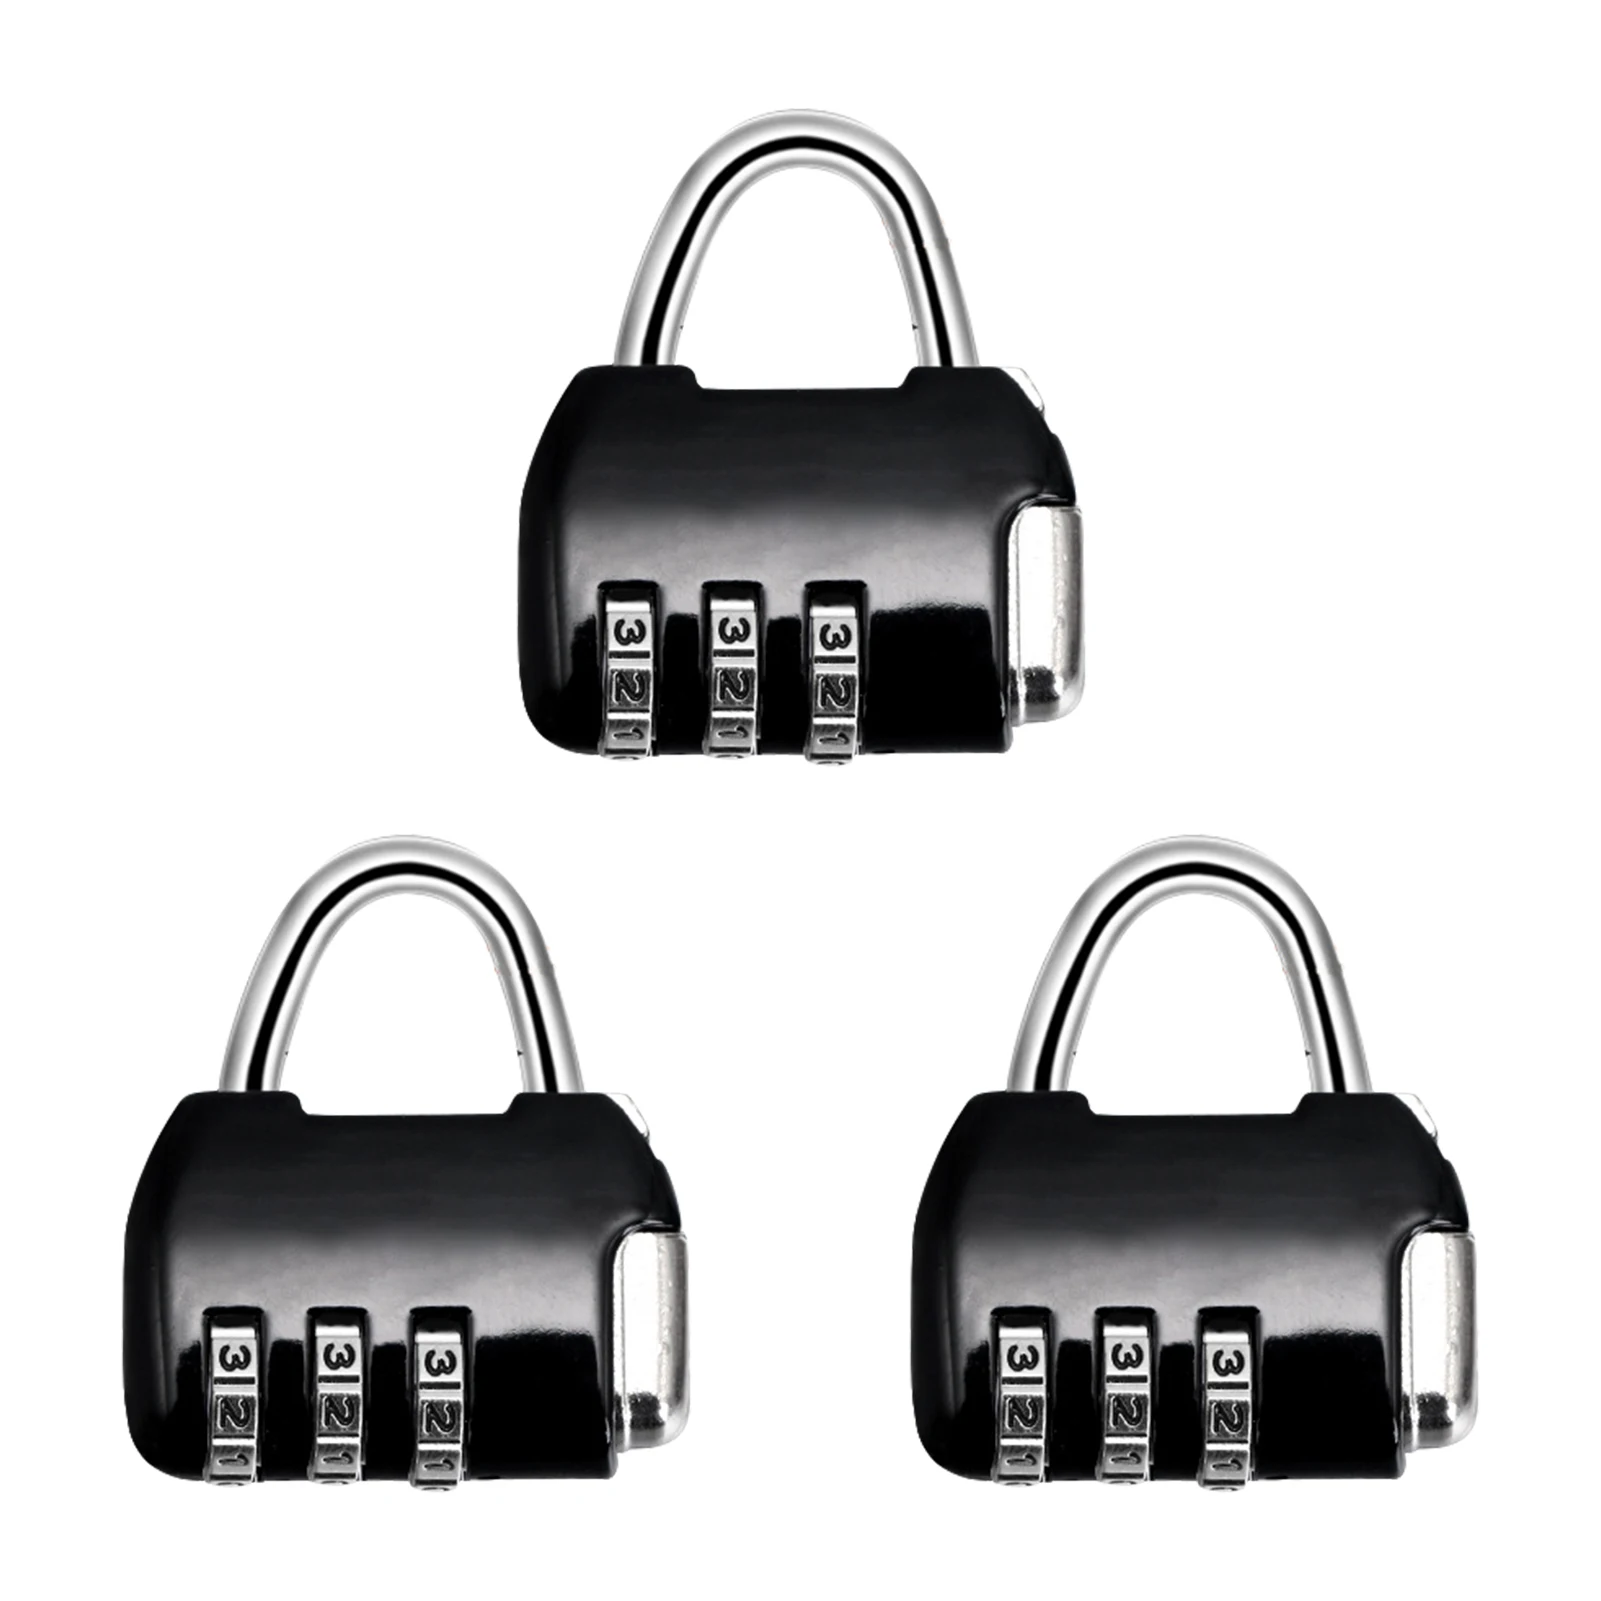 

3pcs Dormitory 3 Digital Zinc Alloy Password Padlock Anti Theft Easy Install For Gym Cabinets Window Security Door Luggage